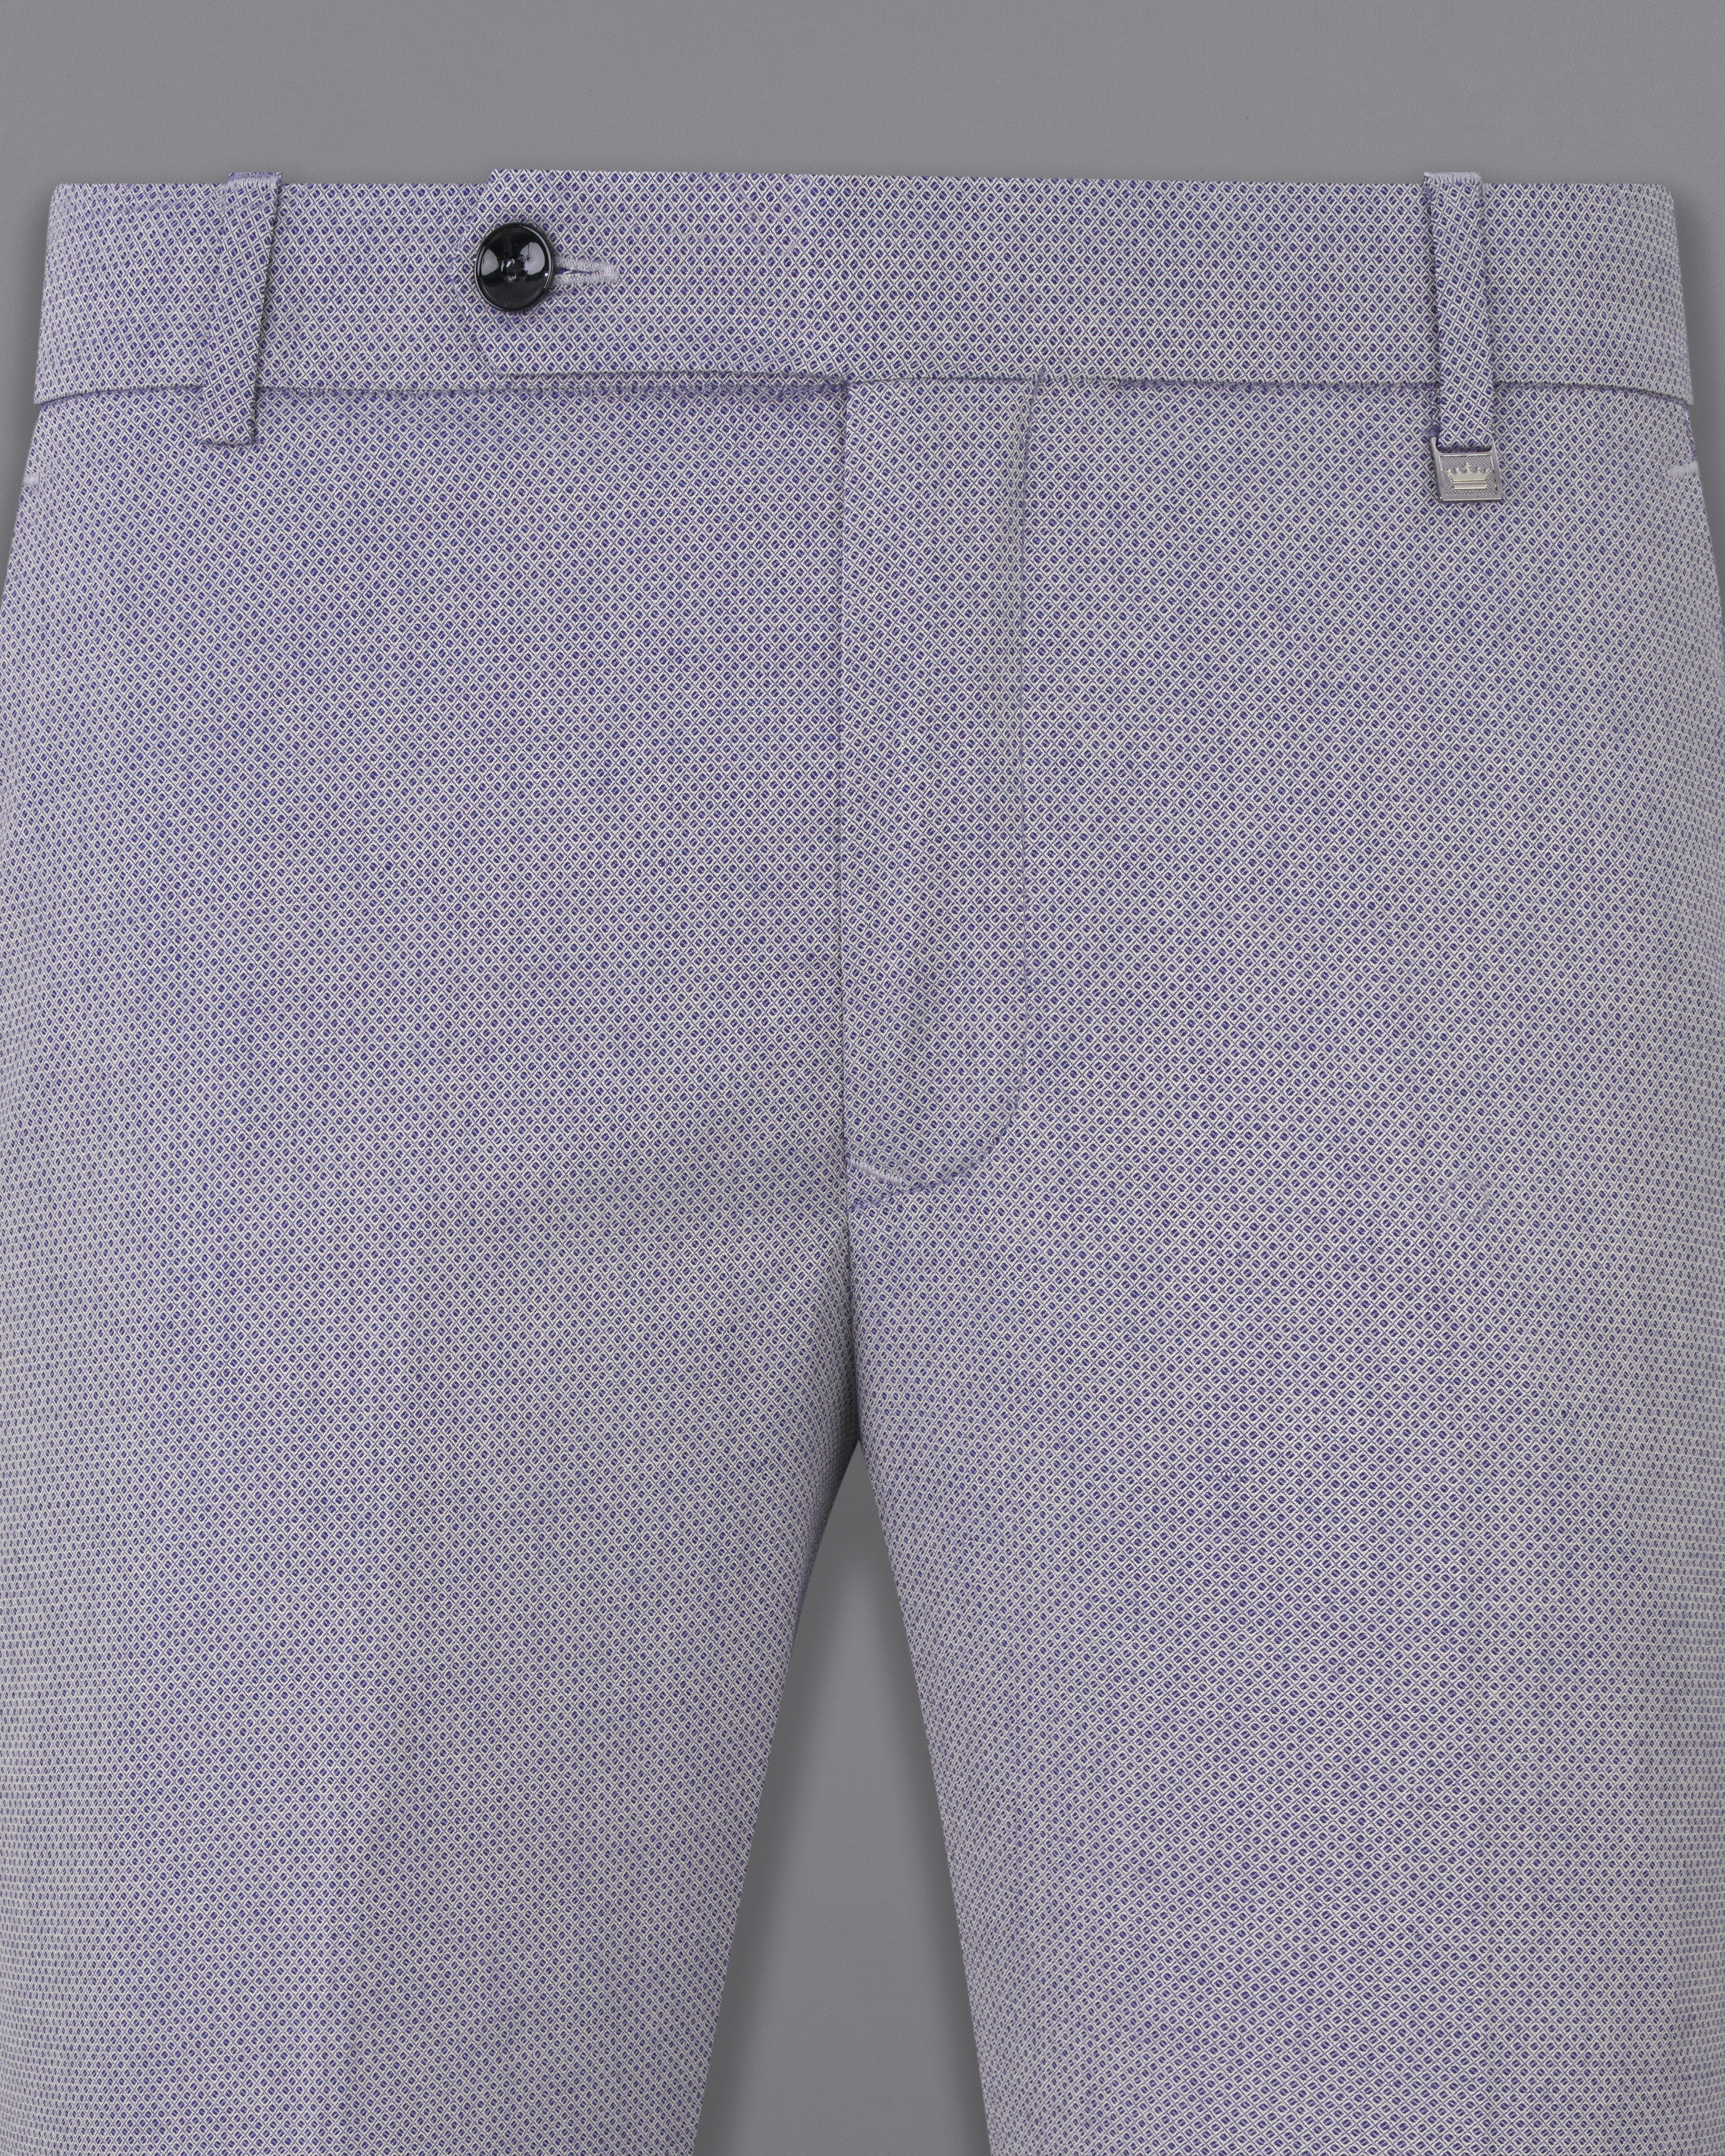 Mulled Blue Textured Pant T2547-28, T2547-30, T2547-32, T2547-34, T2547-36, T2547-38, T2547-40, T2547-42, T2547-44